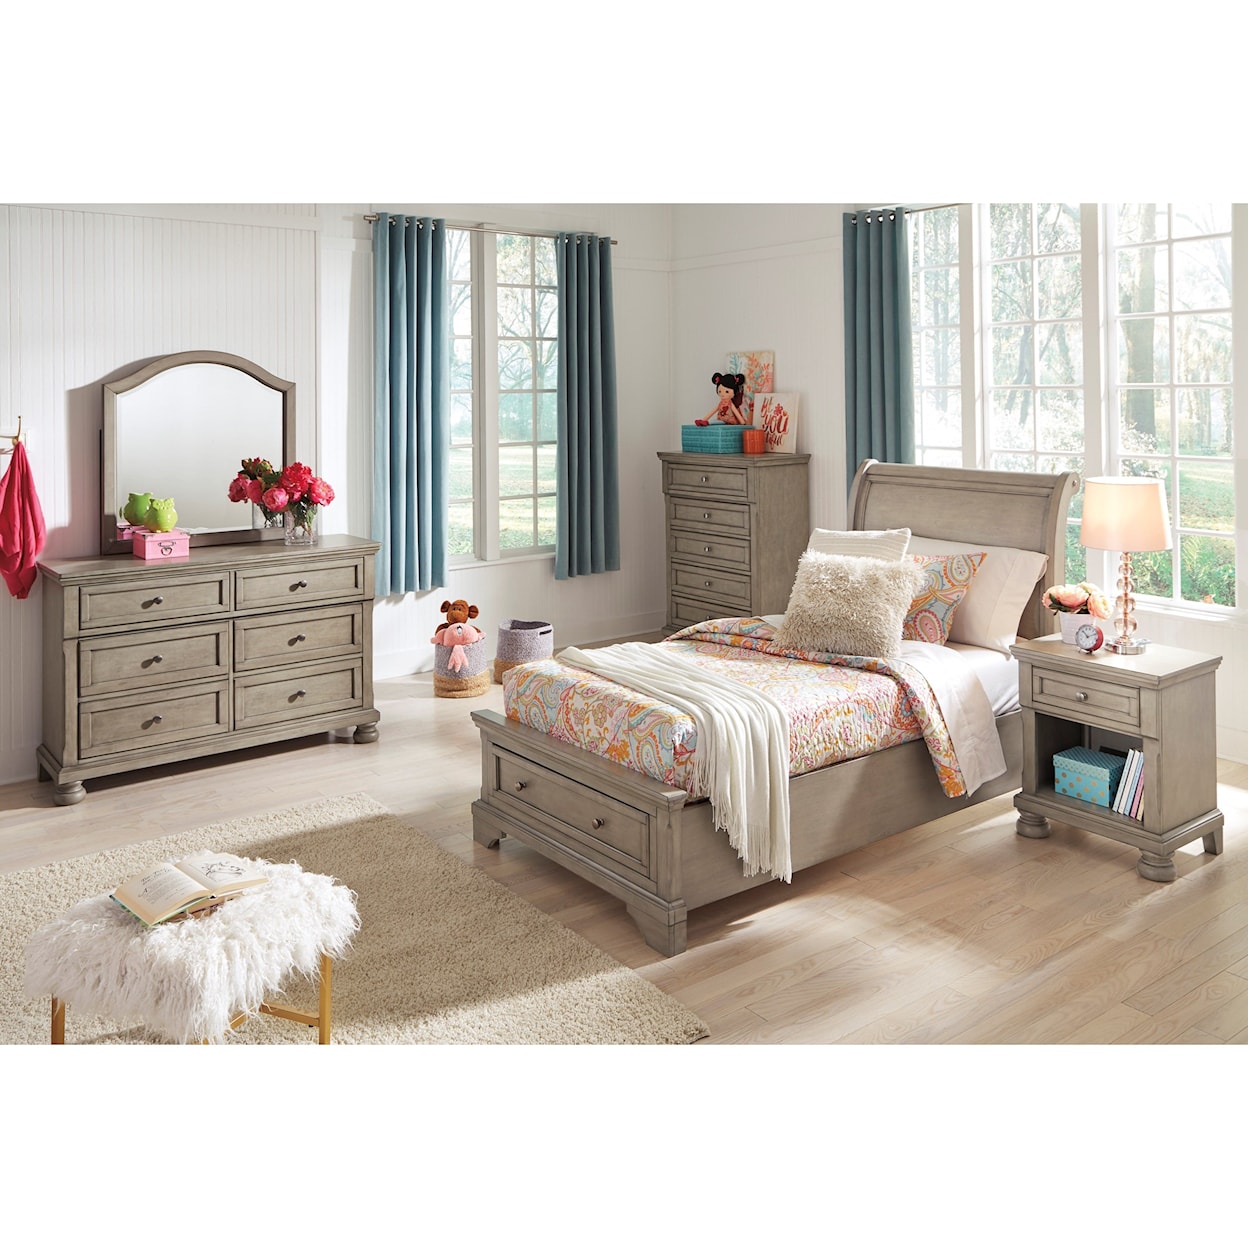 Signature Design by Ashley Lettner 7pc Twin Bedroom Group